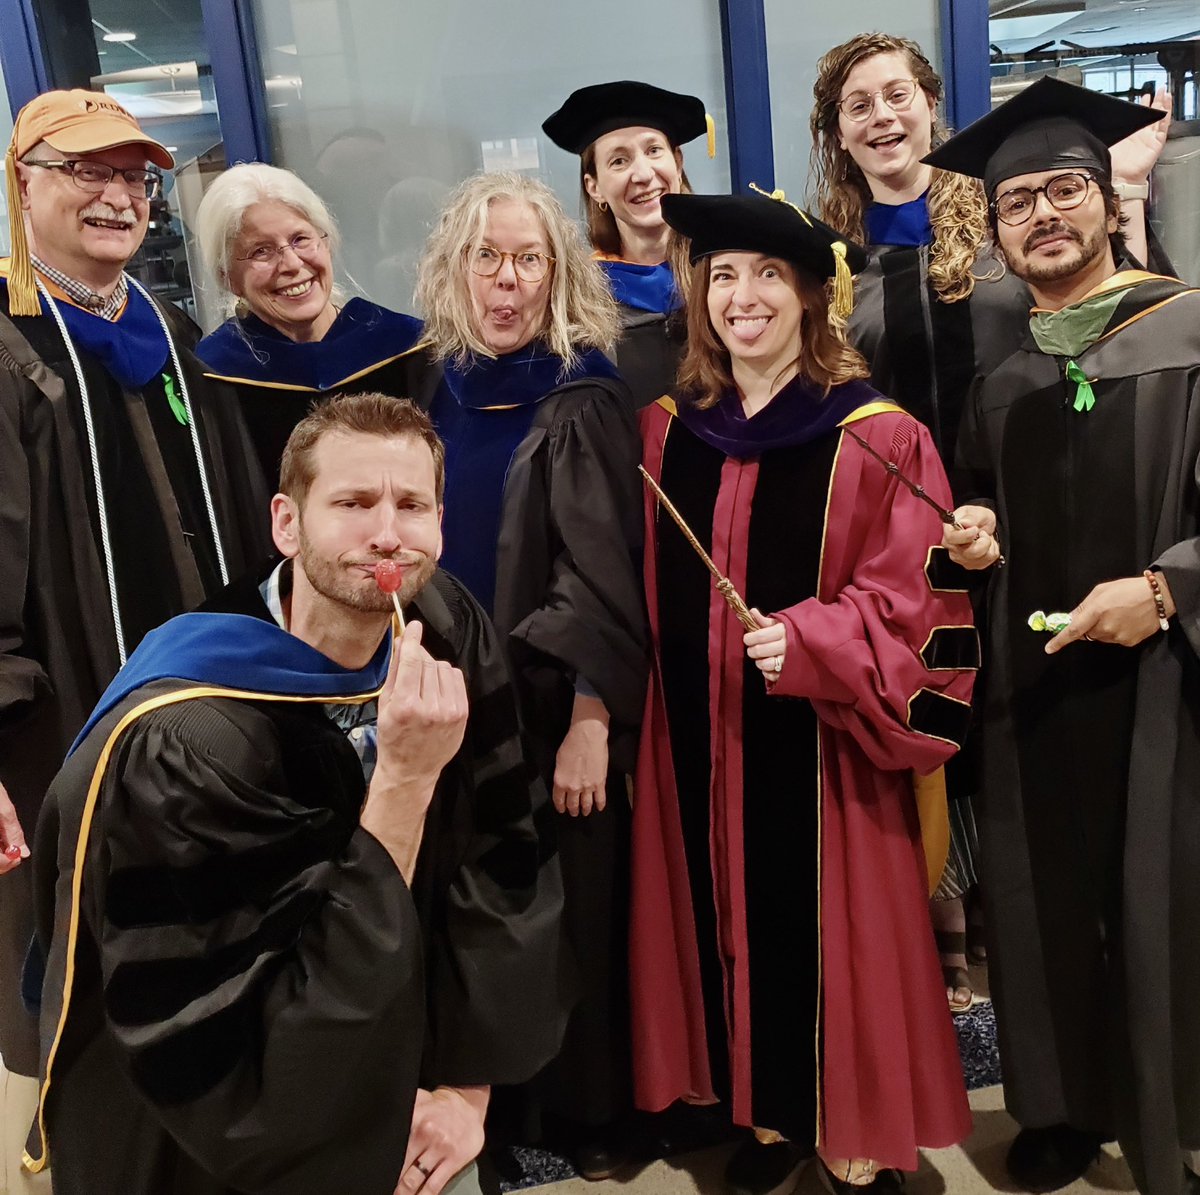 #heymac Robes✅ Hats✅wands✅
@MacalesterBio is all set to cheer the graduating class of 2023 @Macalester #graduation2023 🎉🎊🎓 #AcademicChatter #academiclife 
📸@marcpisansky